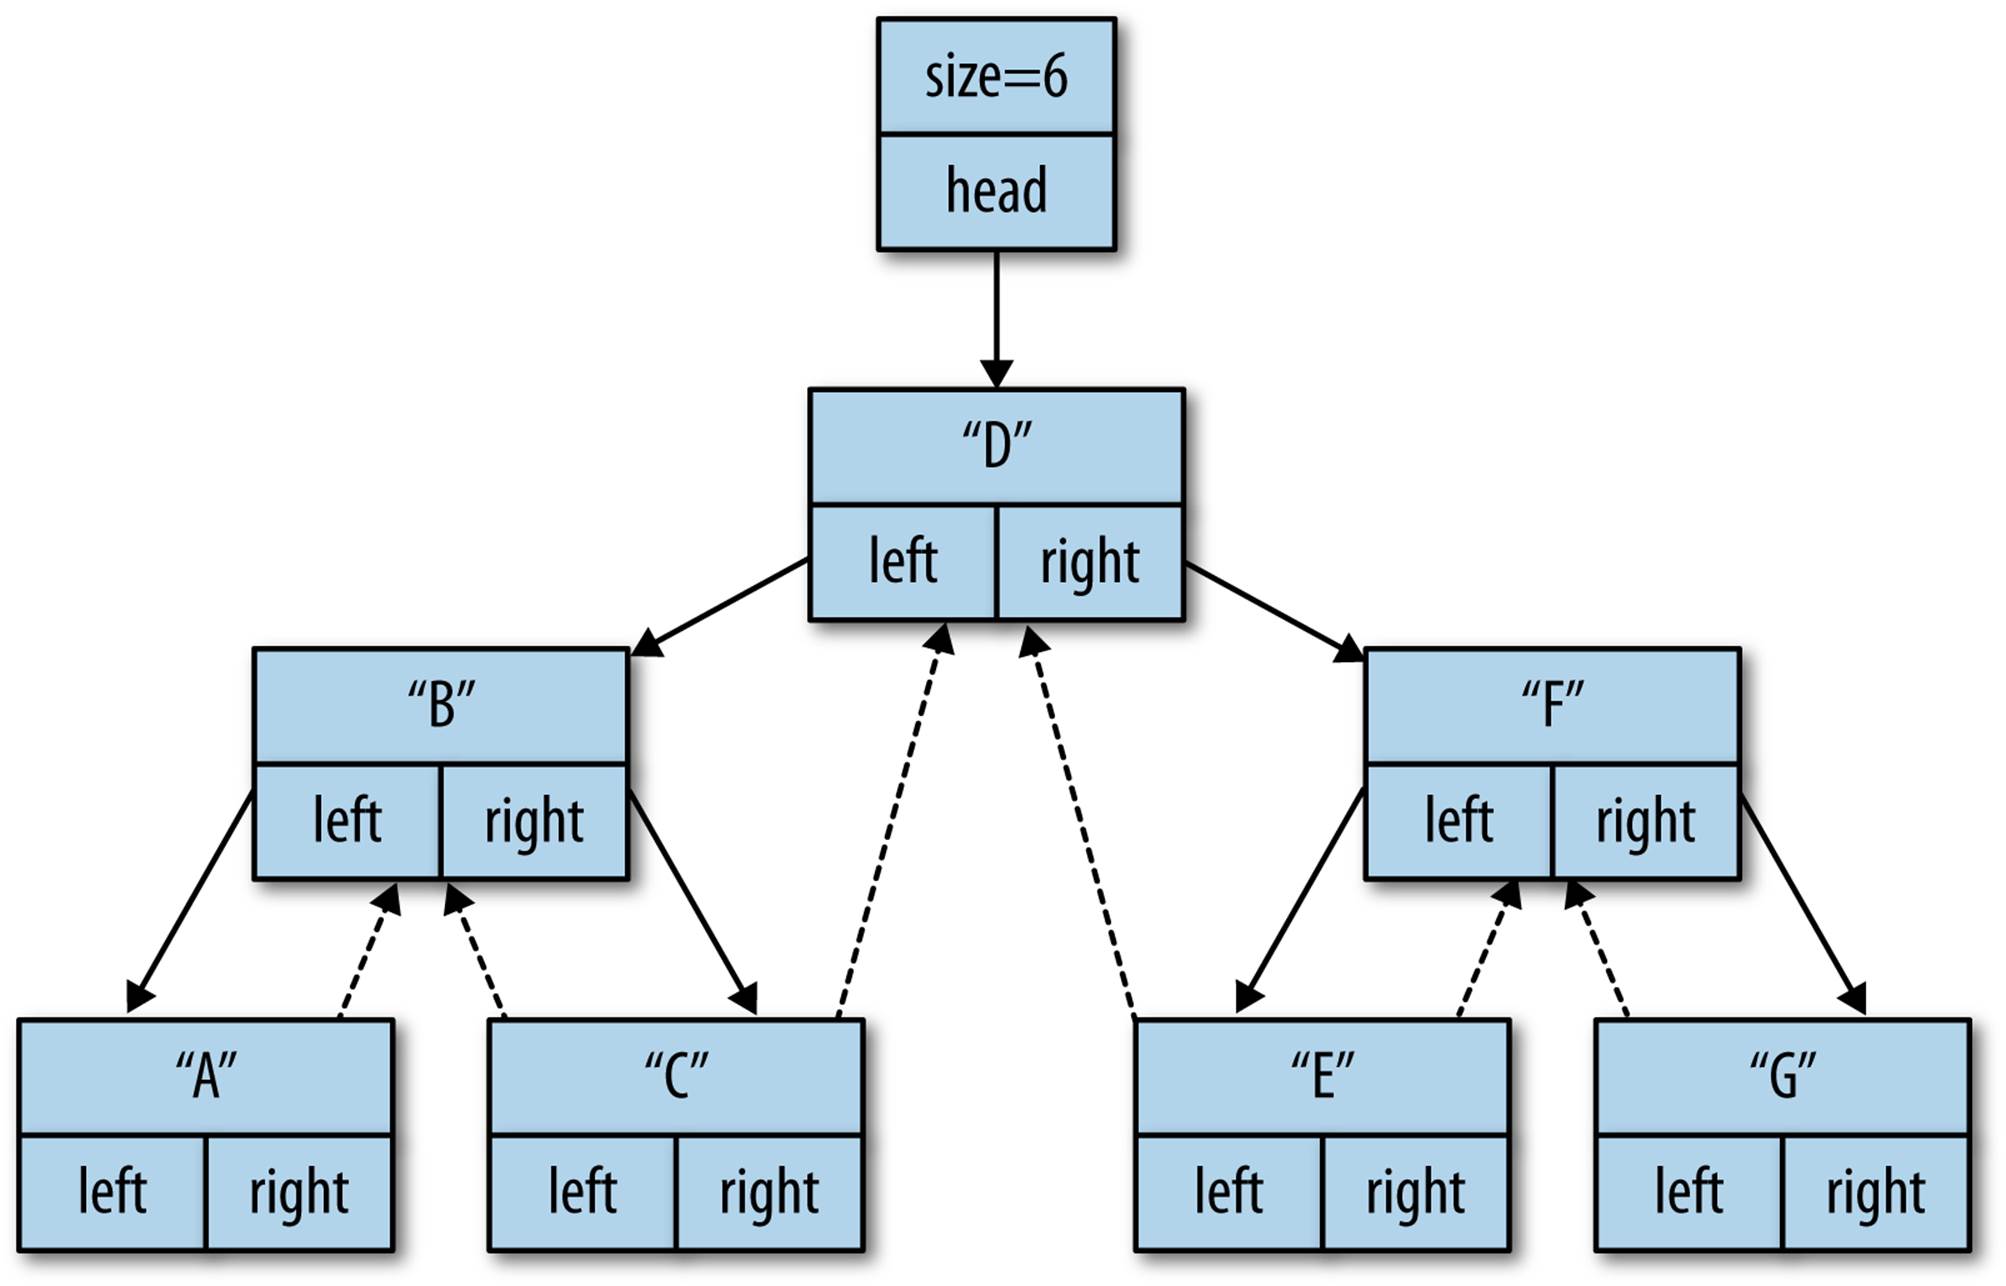 std::map is a balanced binary tree of nodes containing the key and value